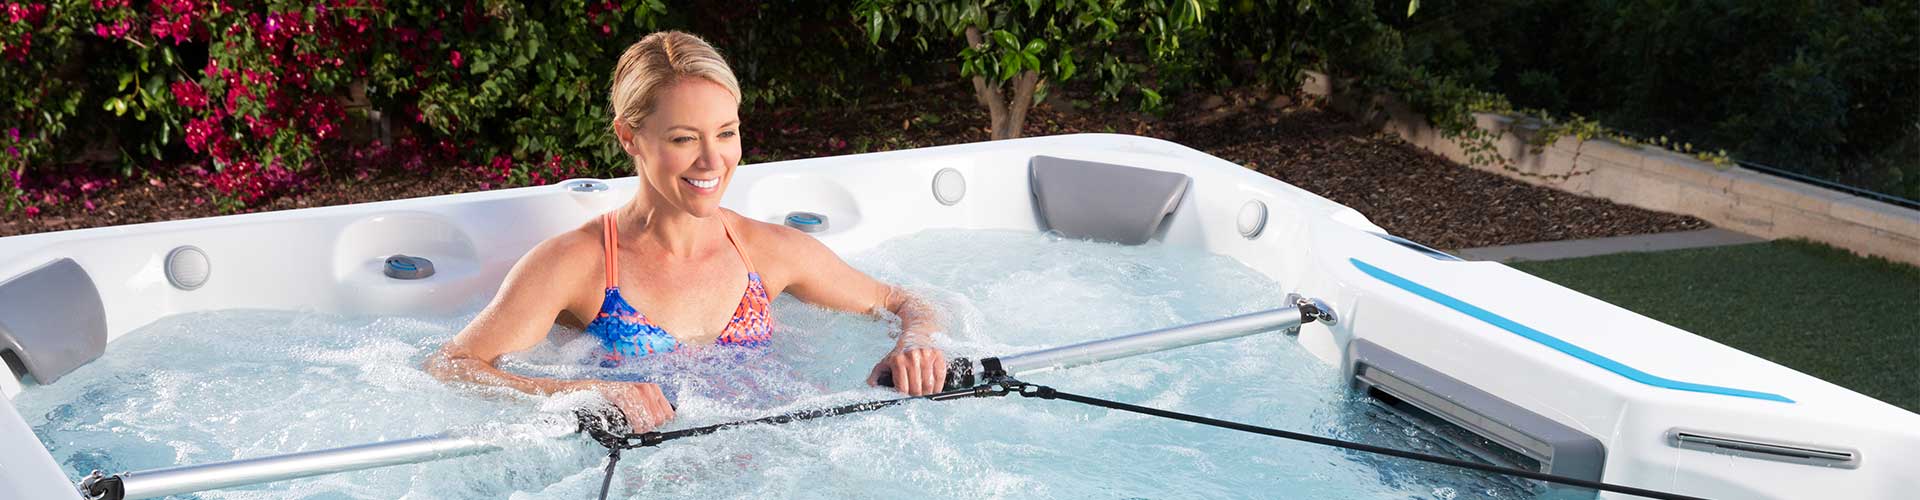 Entertain the Family with an Exciting Lap Pool, Swim Spas Greenfield